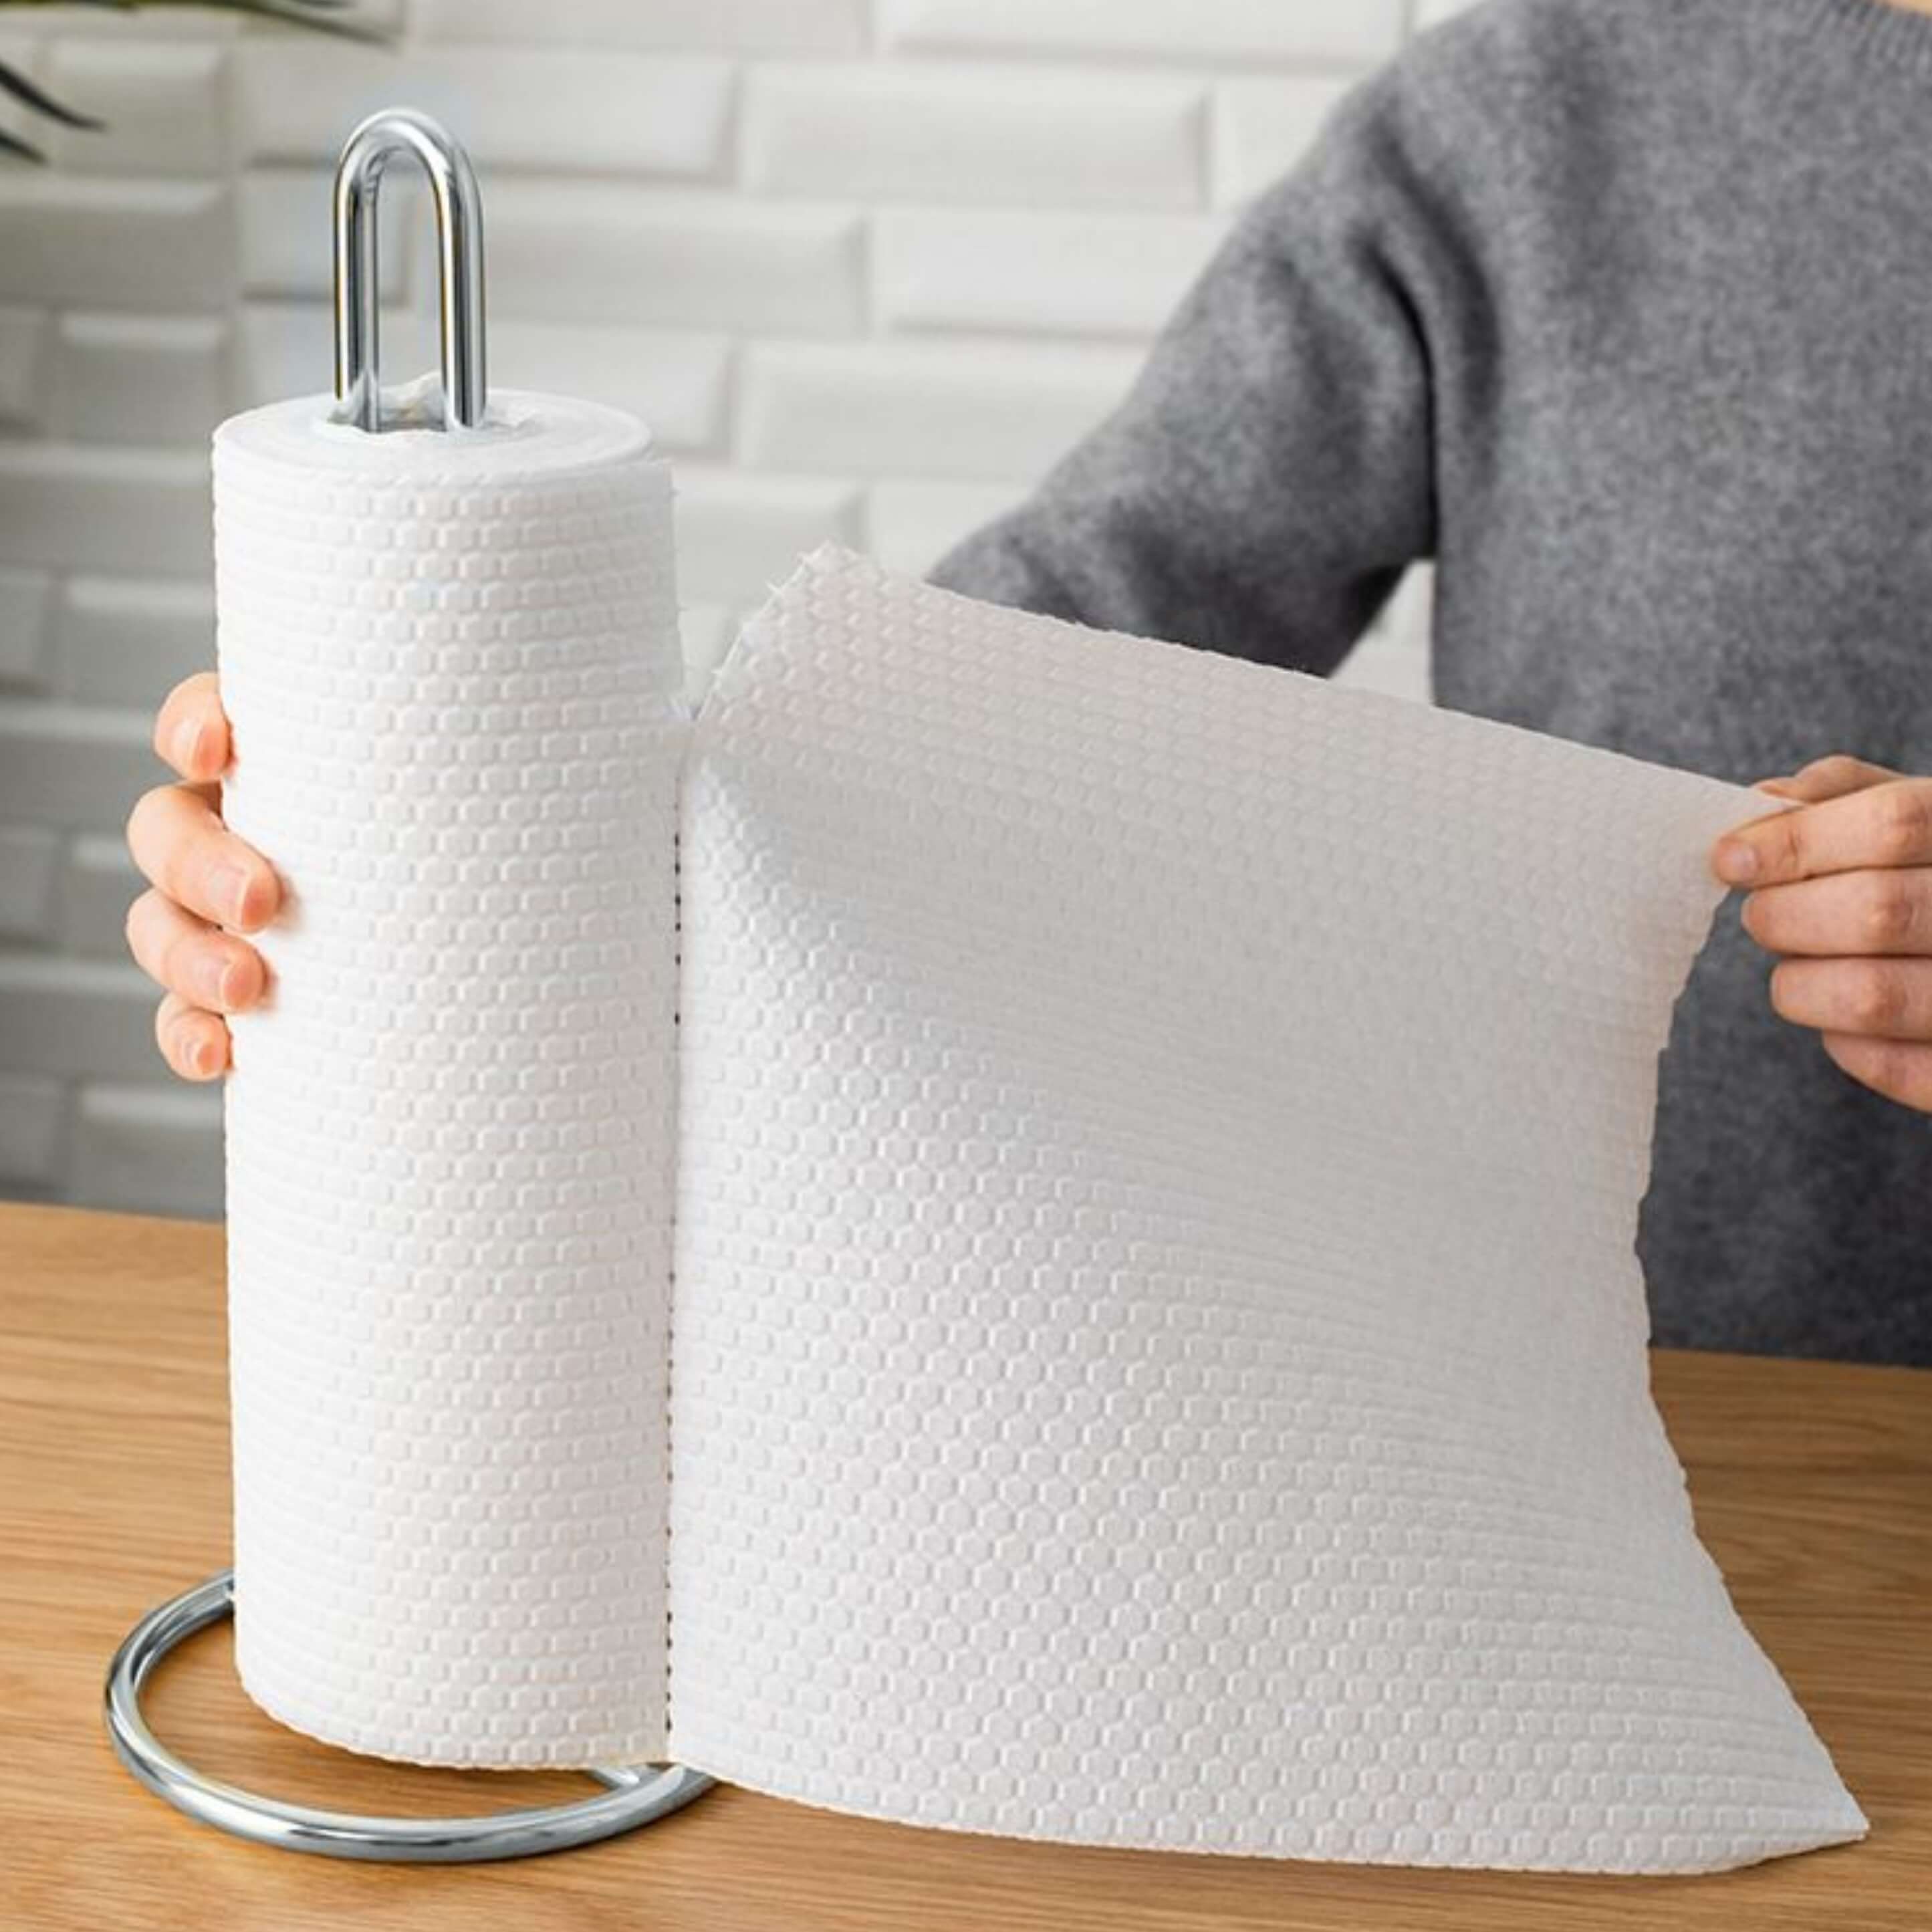 Paper Towel Stand